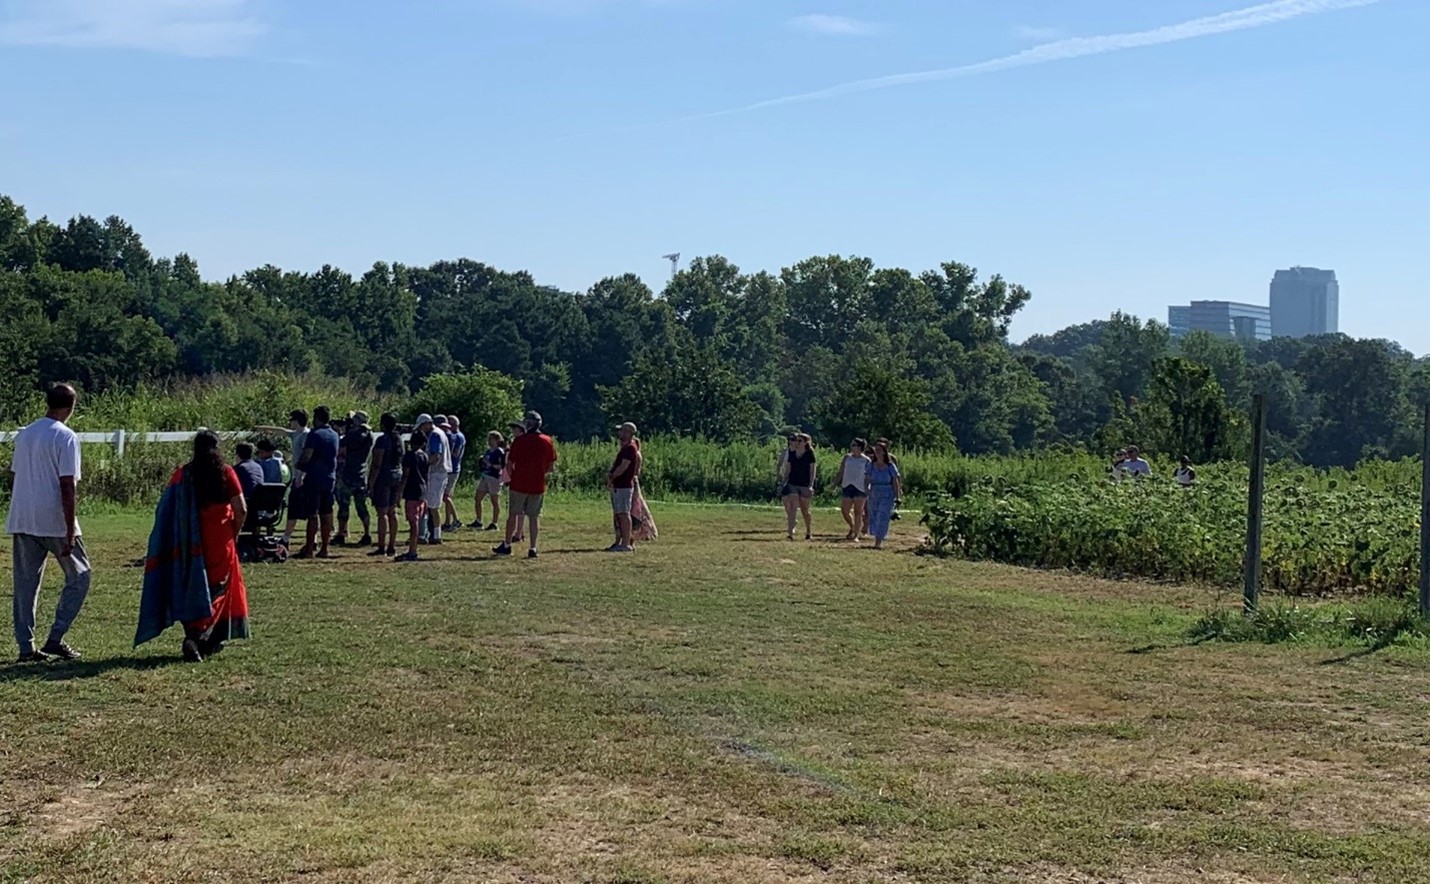 Birders at Dix Park Sunflowers sighting the Painted Bunting - Neal Wisenbaker